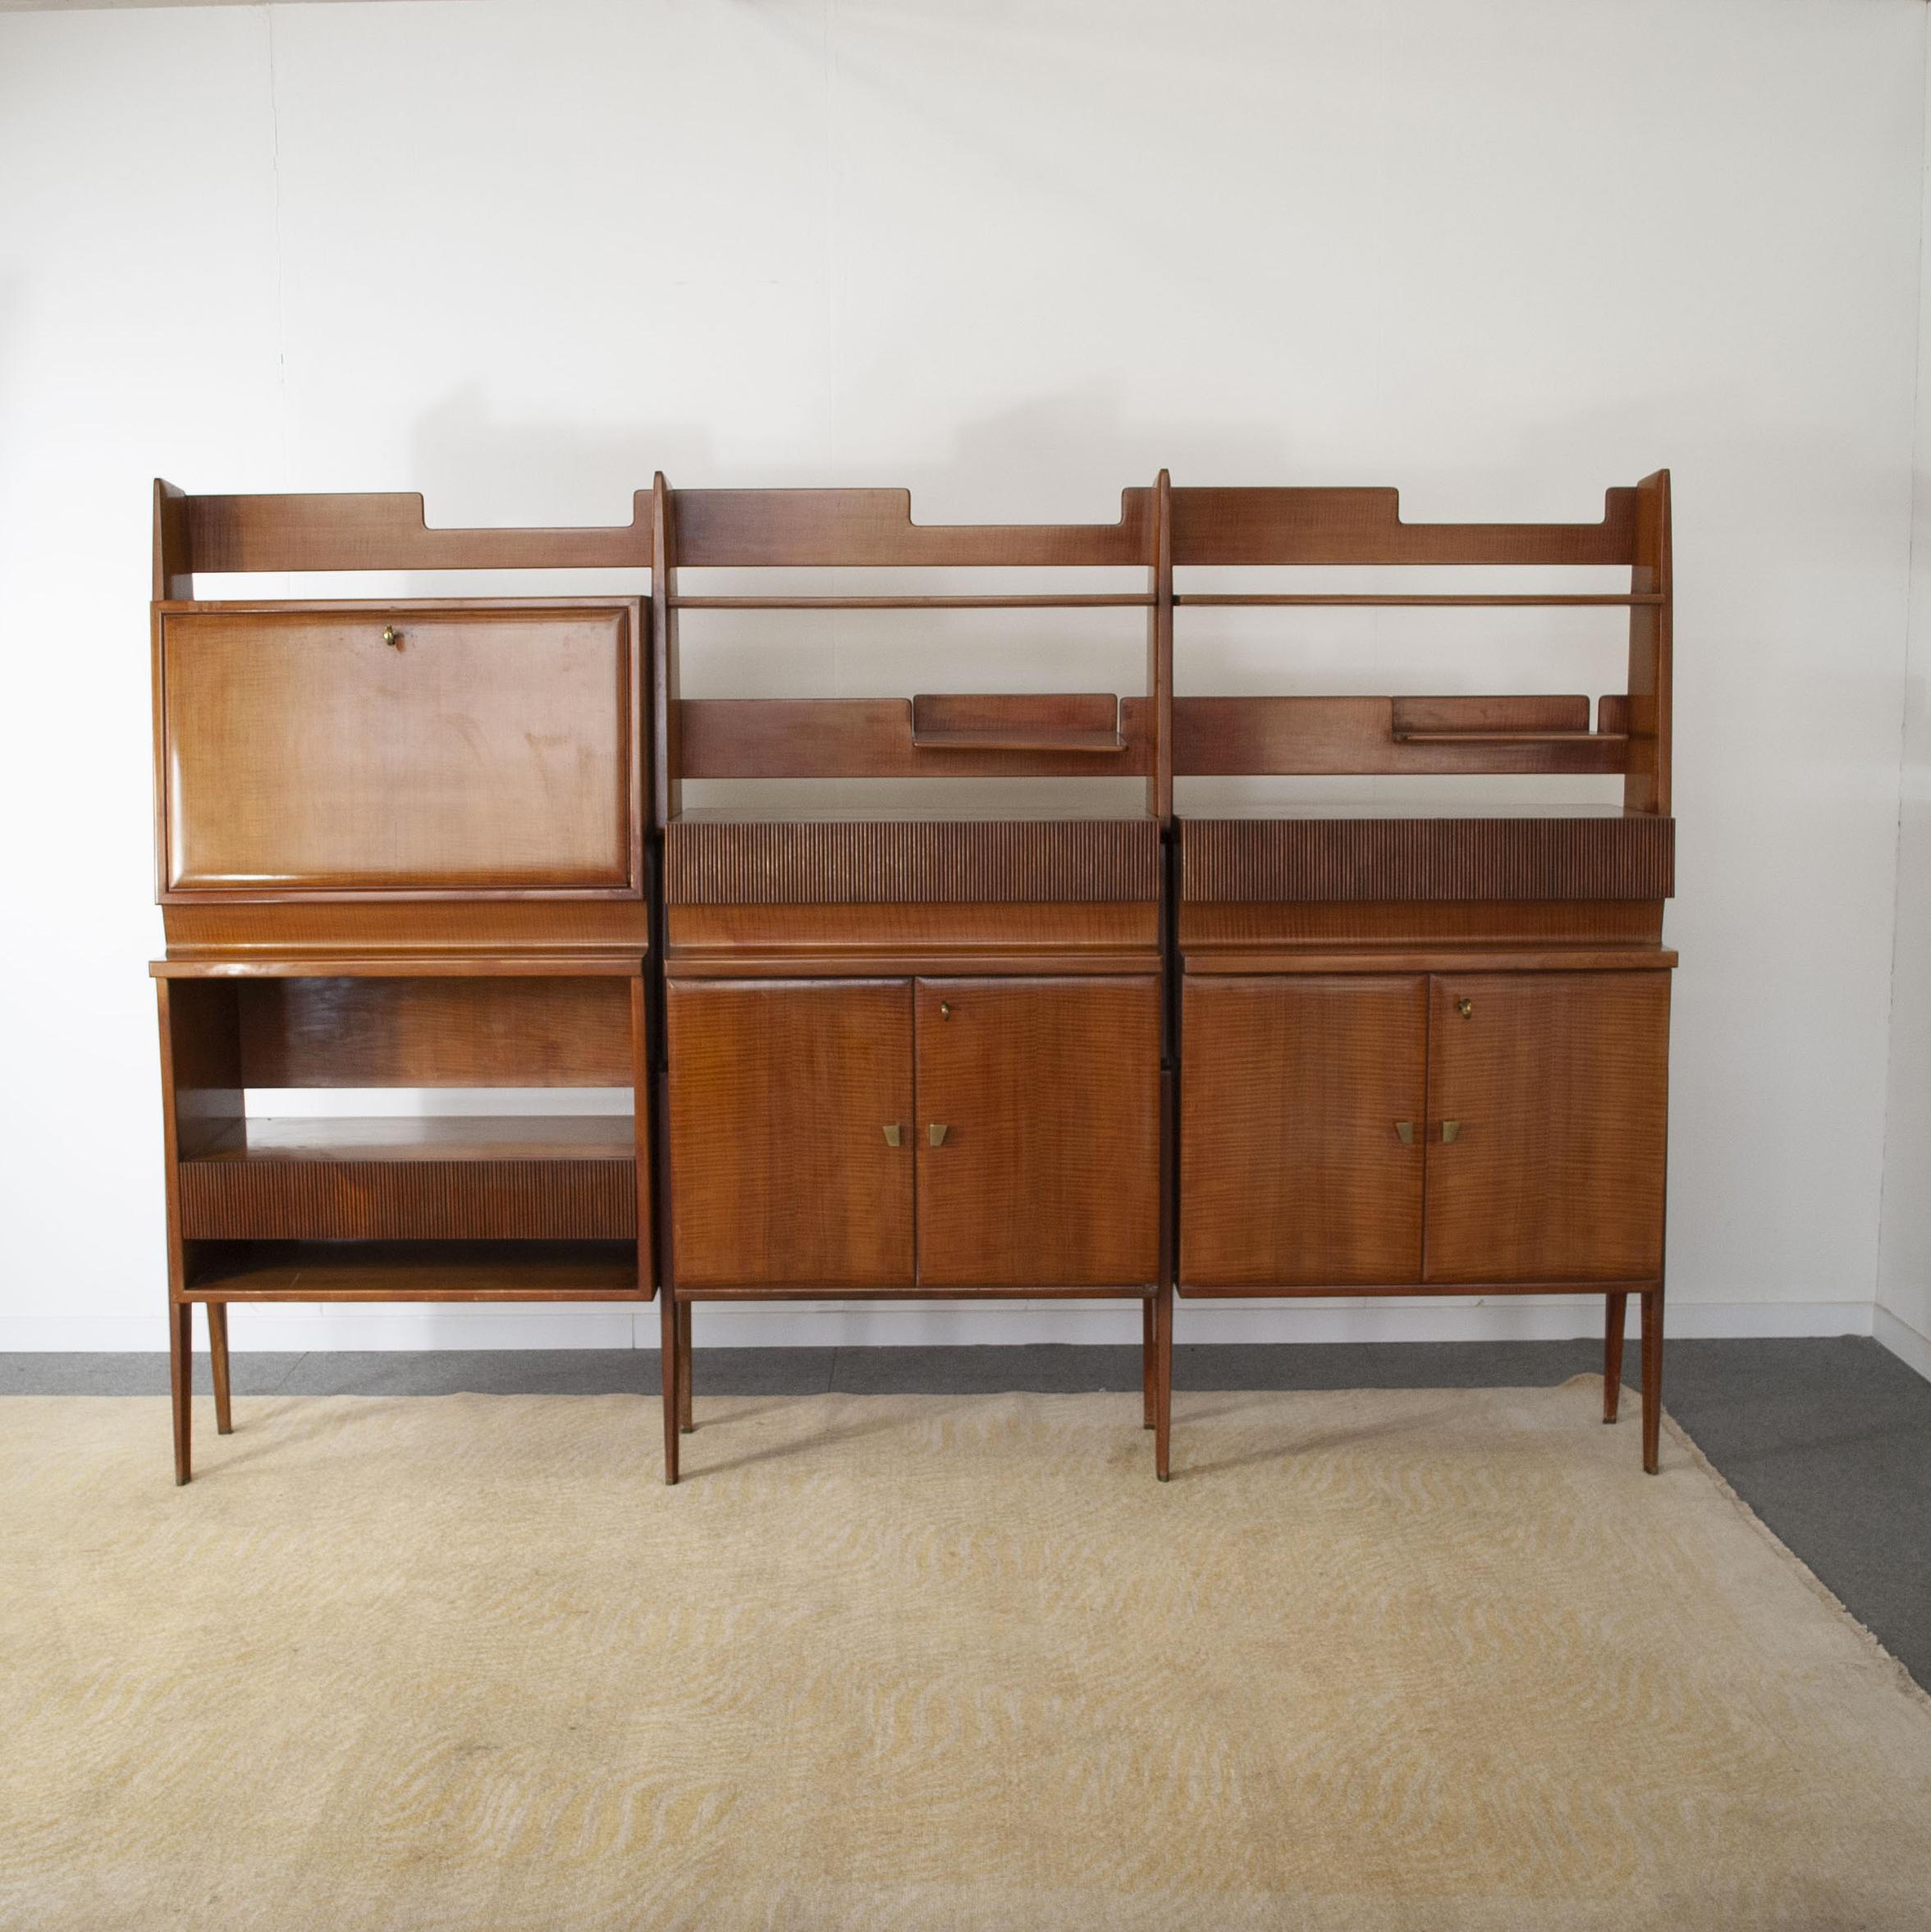 Wonderful wooden bookcase produced by Dassi end of 50’s attributed to Giò Ponti

The furniture by Vittorio Dassi (1893-1973), made in the 40s and 50s, are distinguished by the choice of precious woods such as rosewood, cherry, ash and walnut,